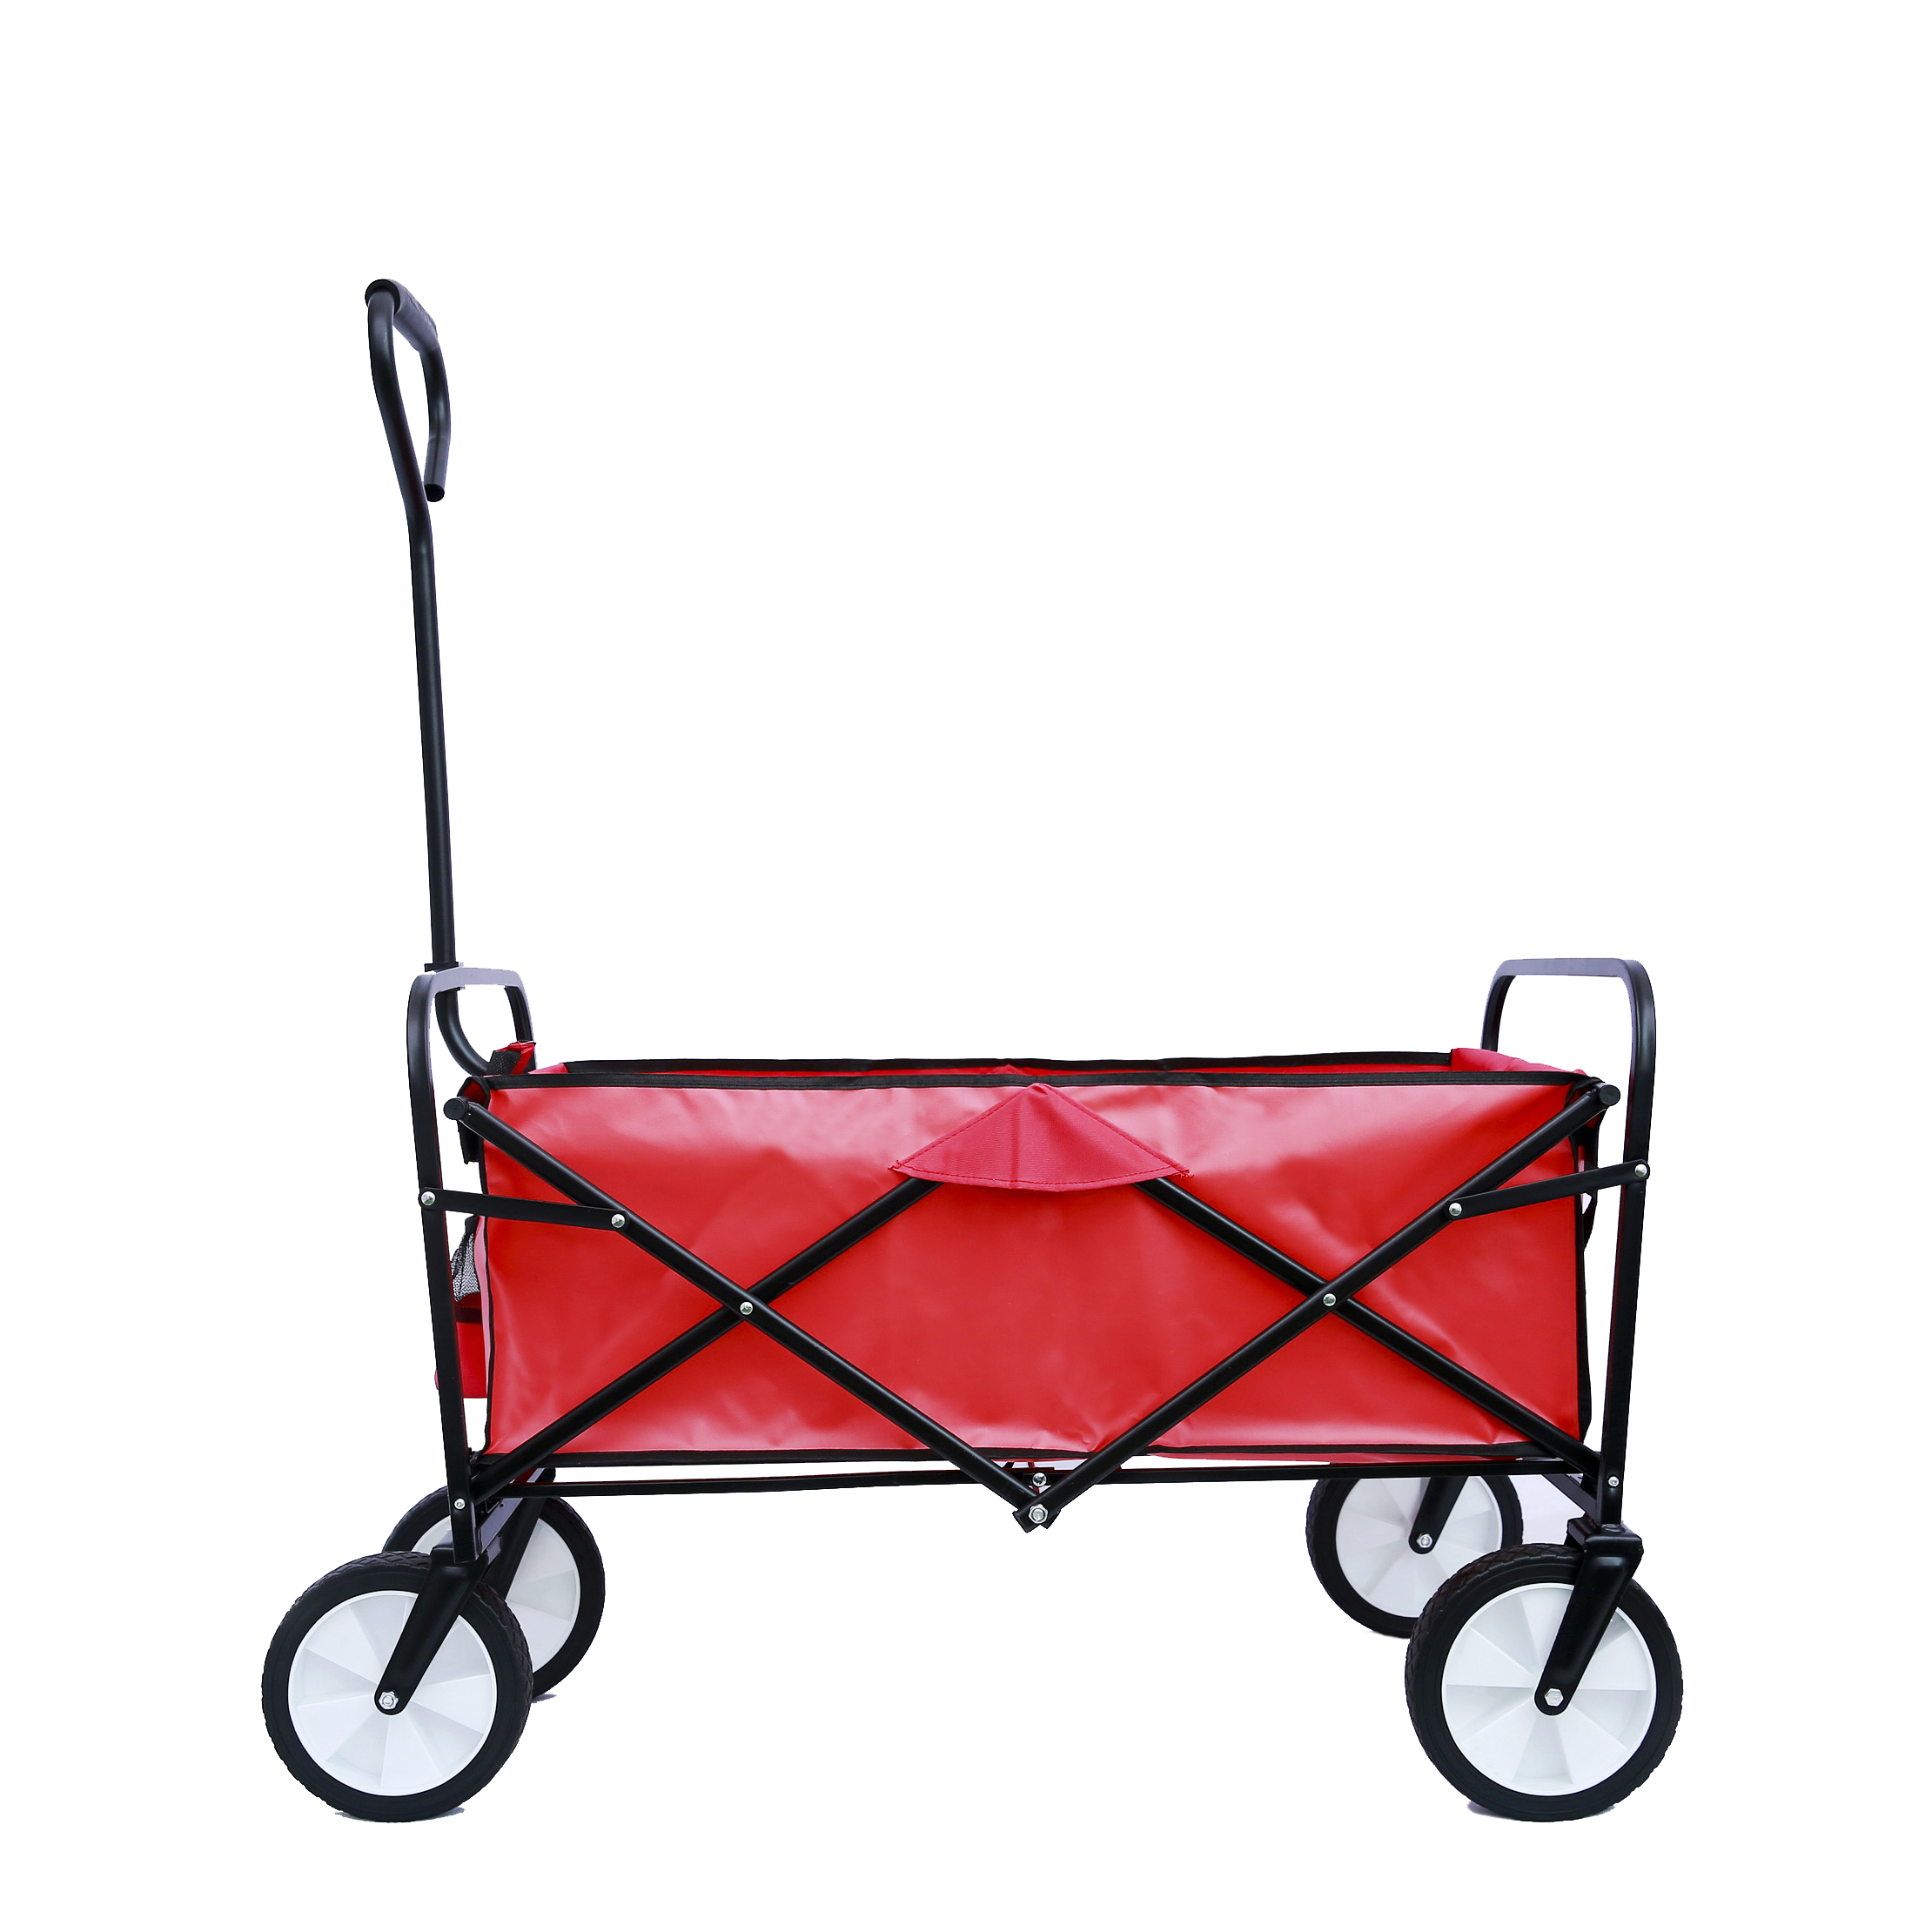 Beach Wagons with Big Wheels for Sand, Sturdy Steel Frame Collapsible Wagon, Foldable Wagon, Grocery Wagon with 2 Mesh Cup Holders, Adjustable Handle for Garden Shopping Picnic Beach, Red, Q3809 - image 3 of 11